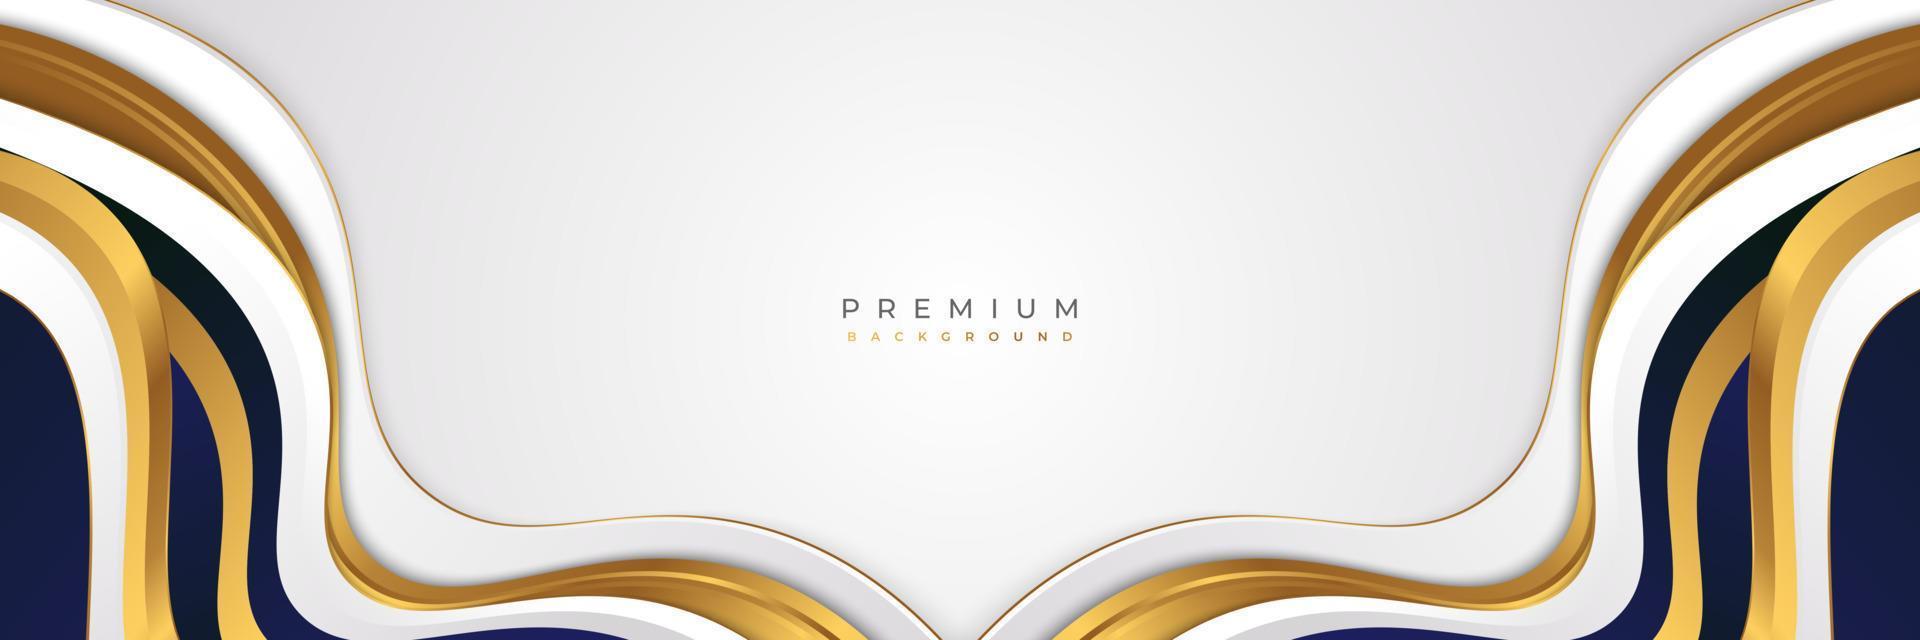 Abstract White, Blue and Gold Luxury Background. Elegant Background with Paper Cut Style vector